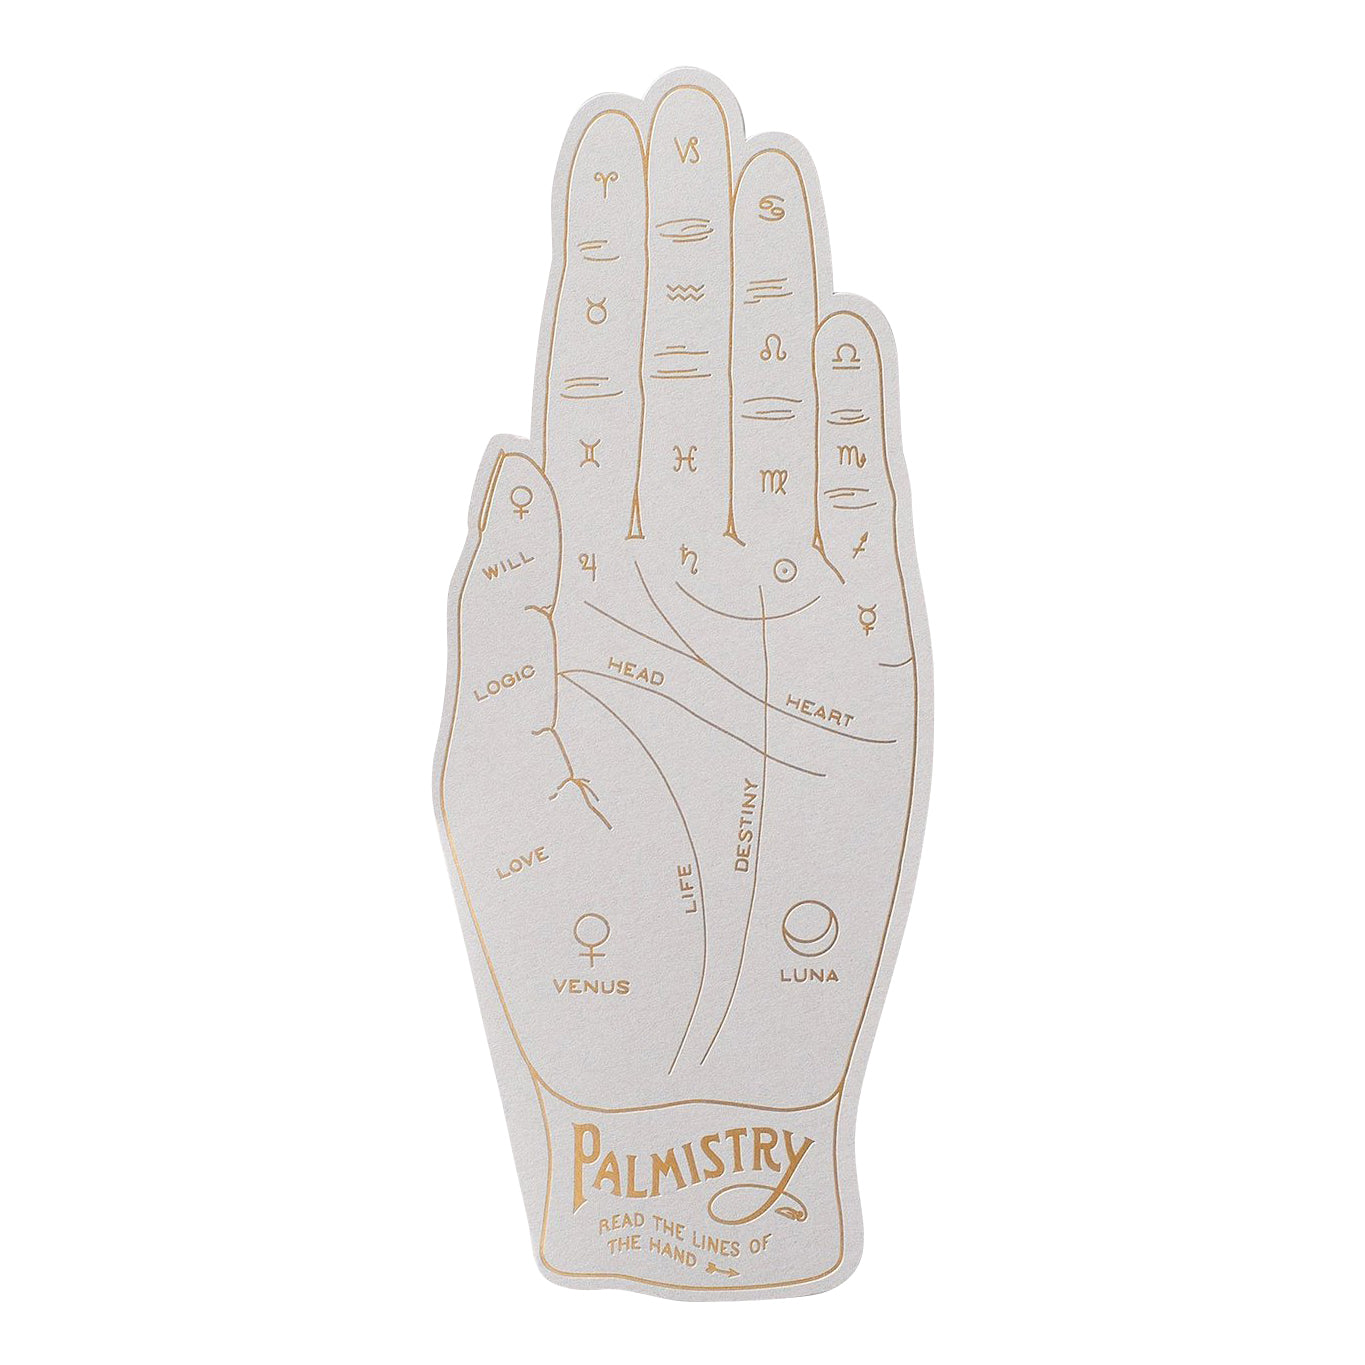 Noat Palmistry Greeting Card 